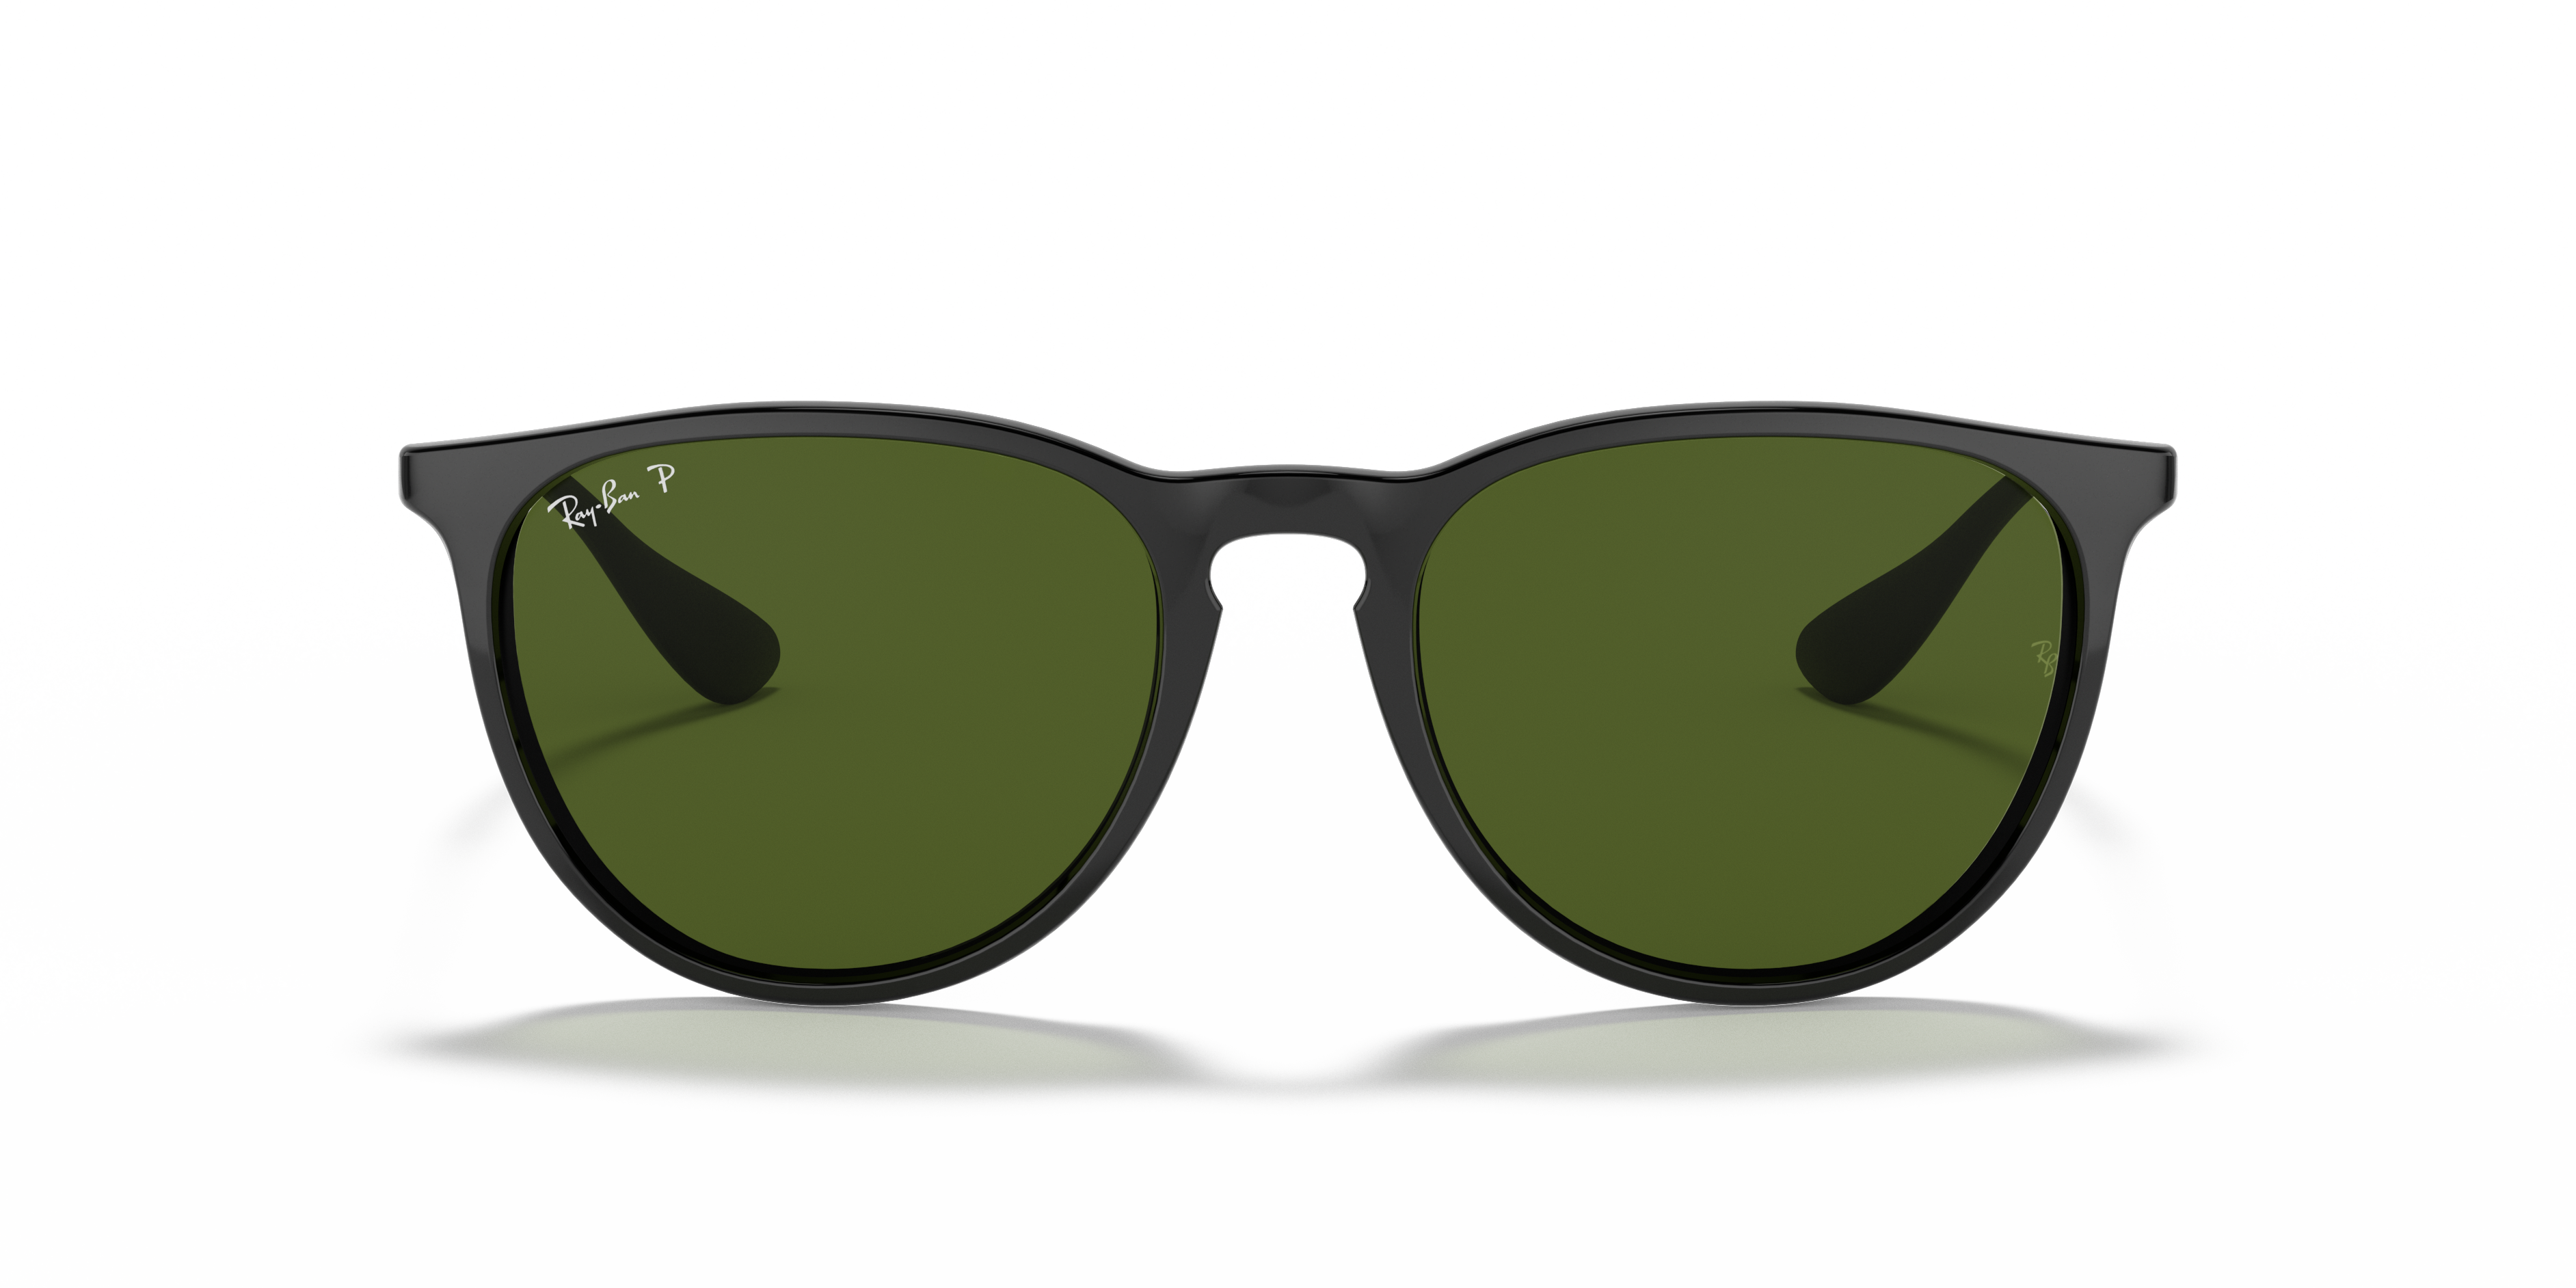 Erika Classic Sunglasses in Black and Green | Ray-Ban®